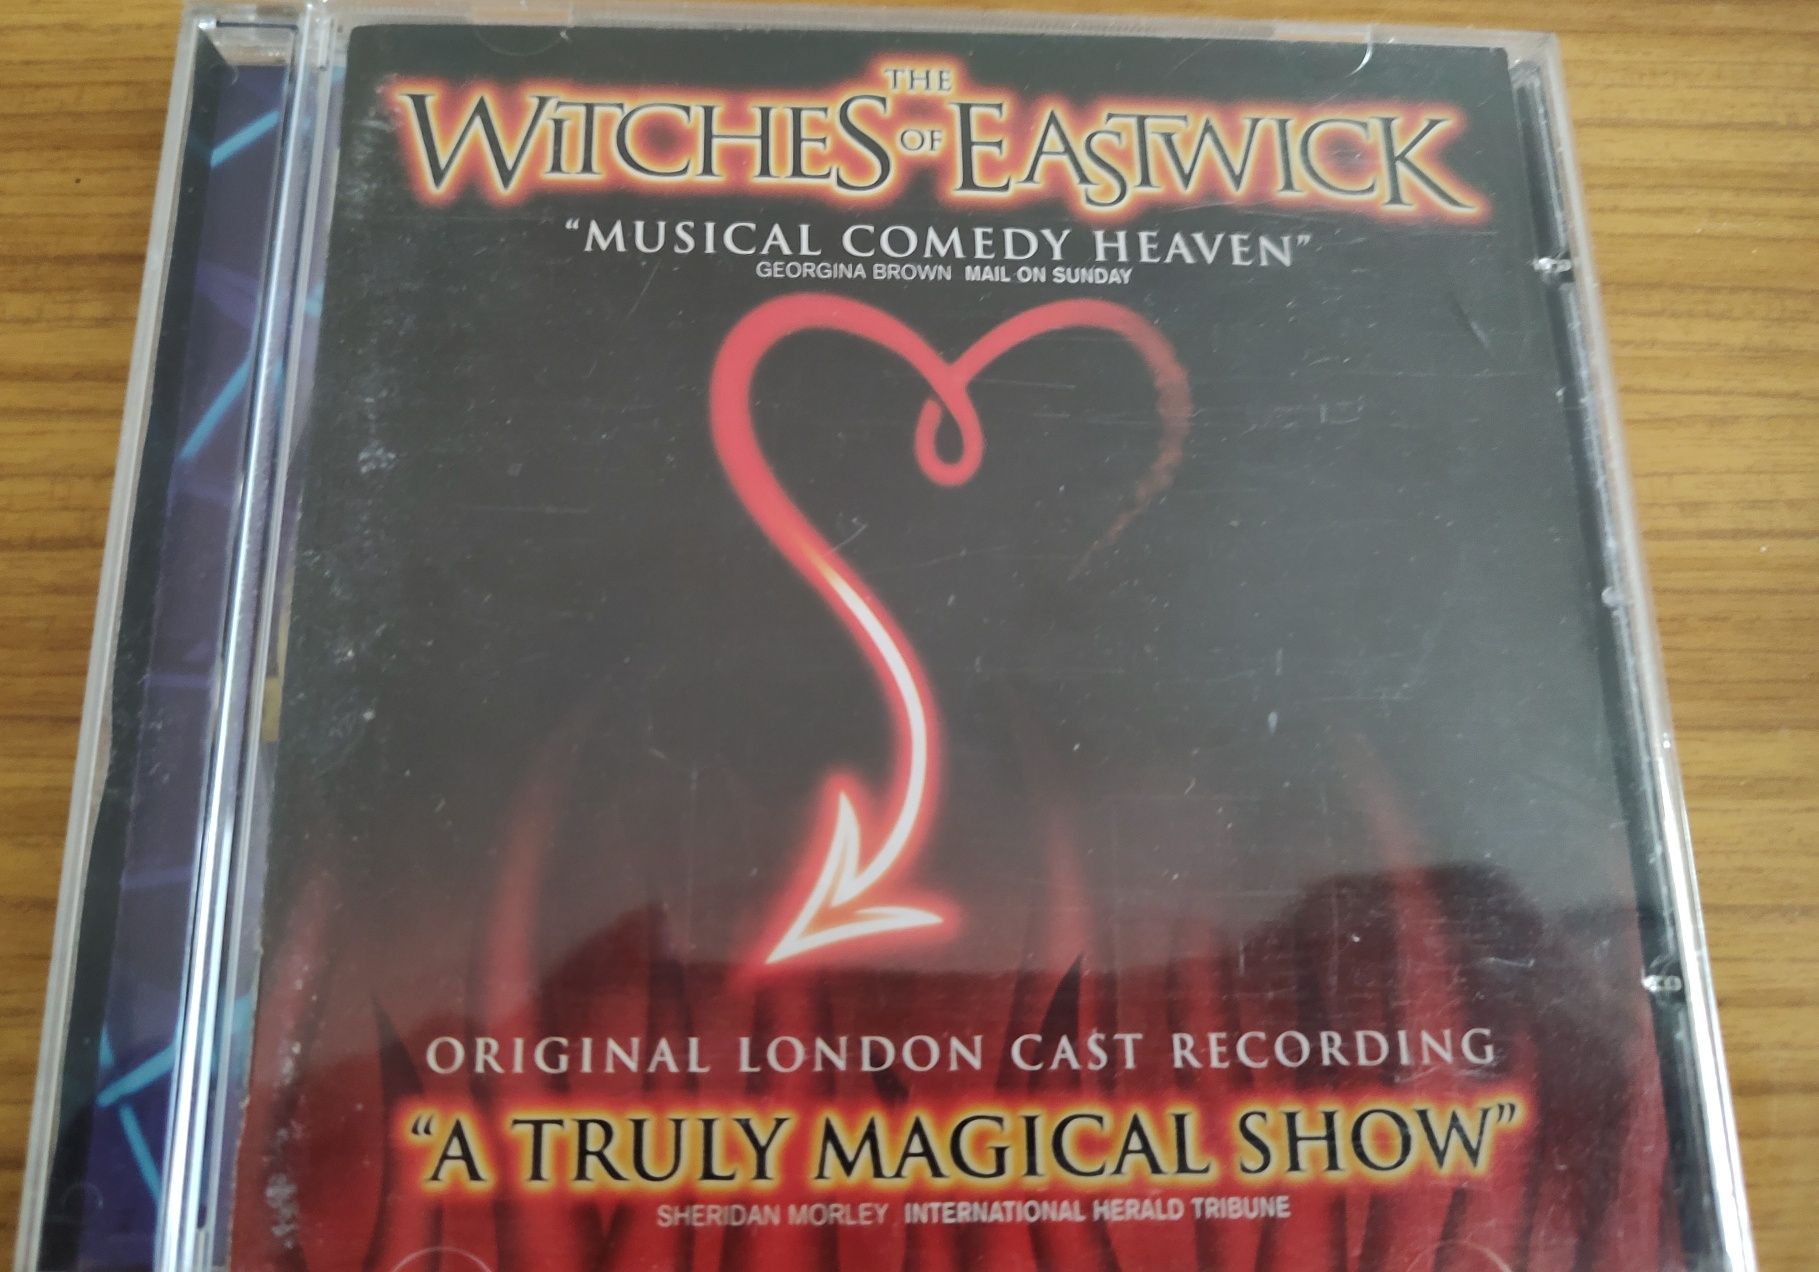 The Witches of Eastwick Original London Cast Recording